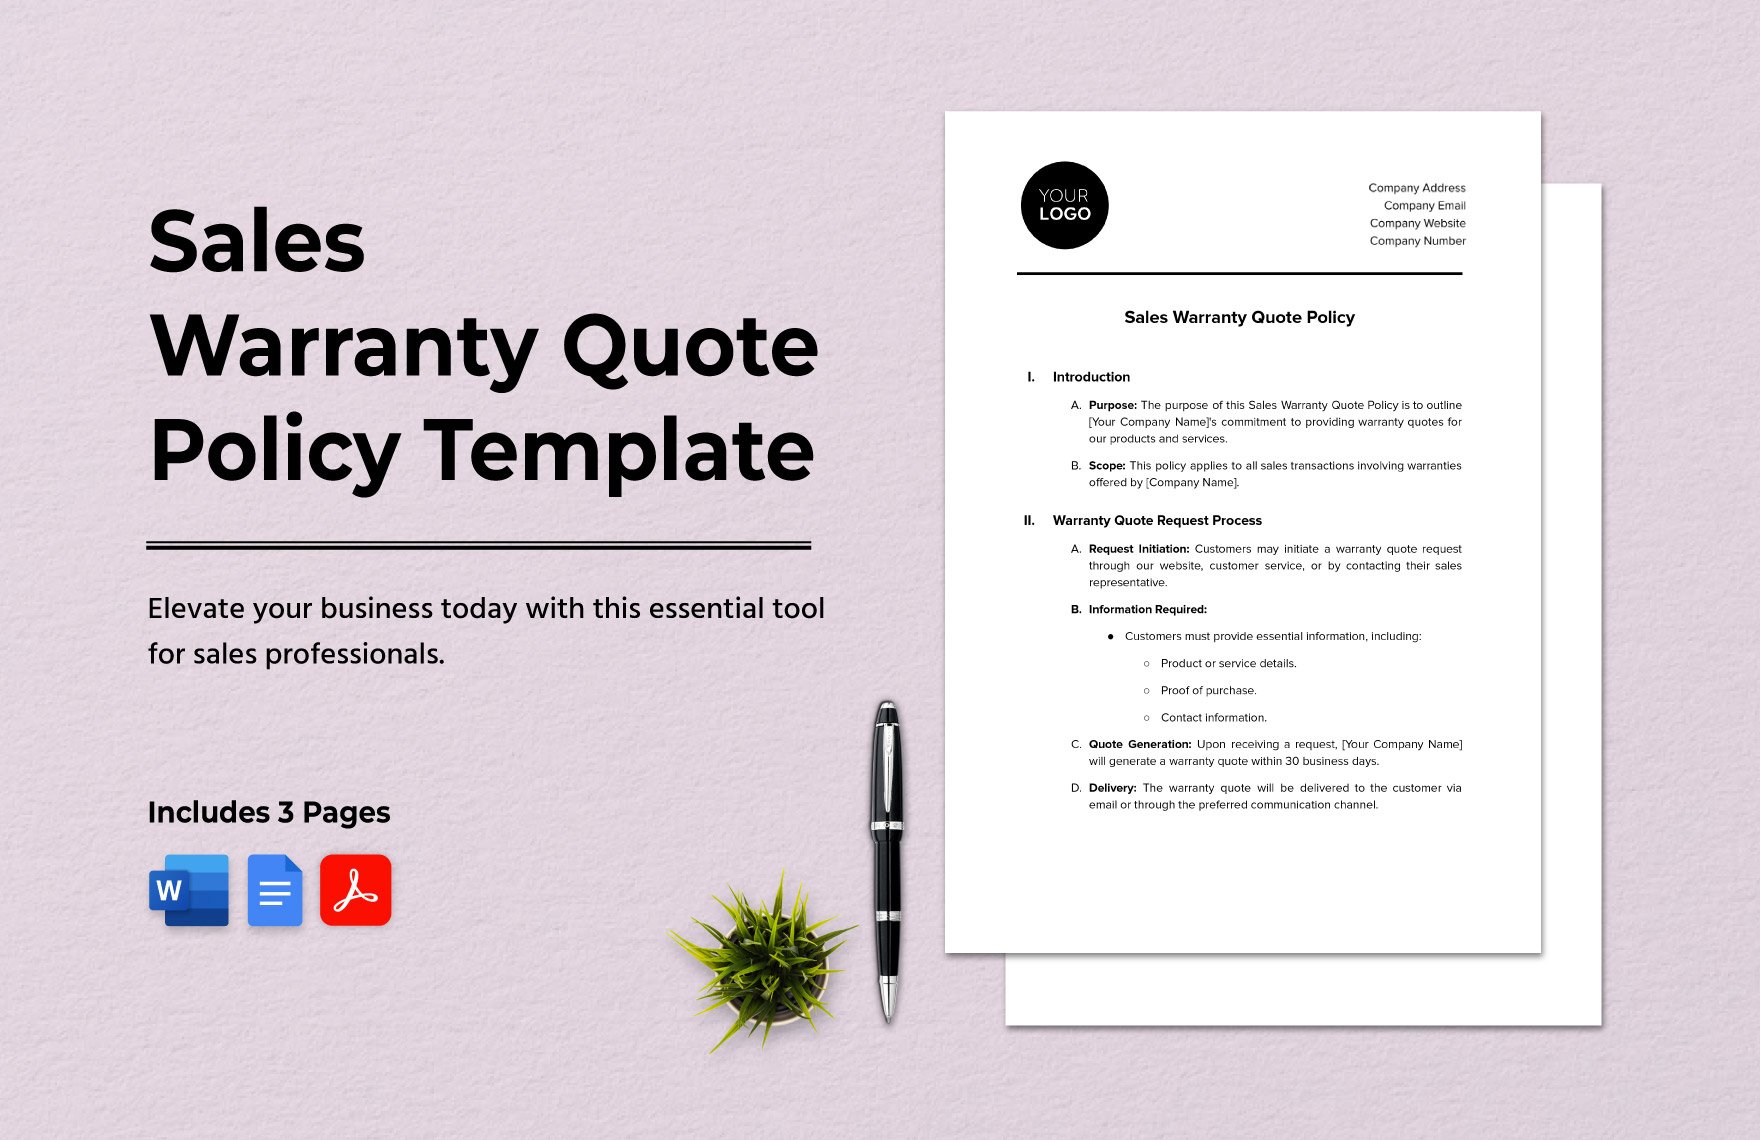 Sales Warranty Quote Policy Template in Word, Google Docs, PDF